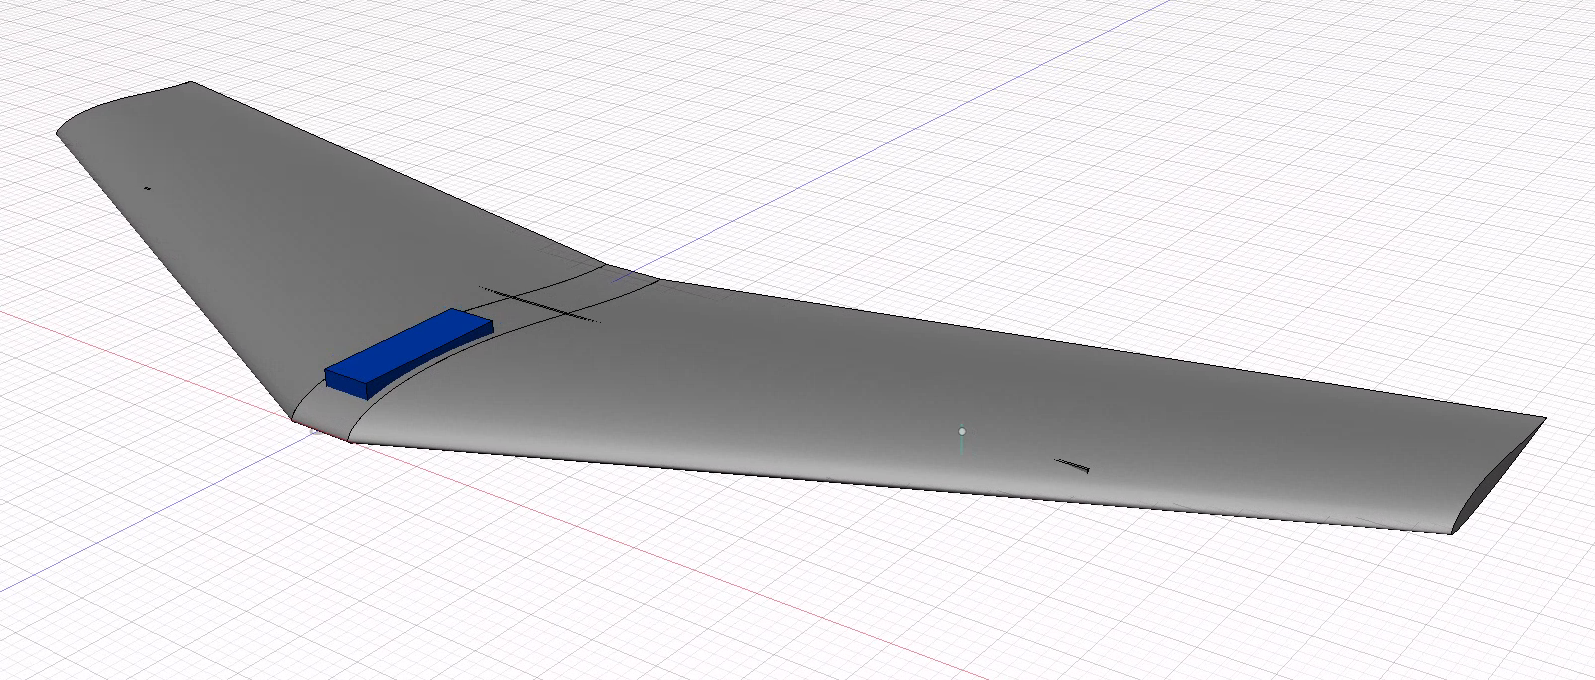 Screenshot of Lakehopper 2&#39;s design in Fusion 360 CAD
software